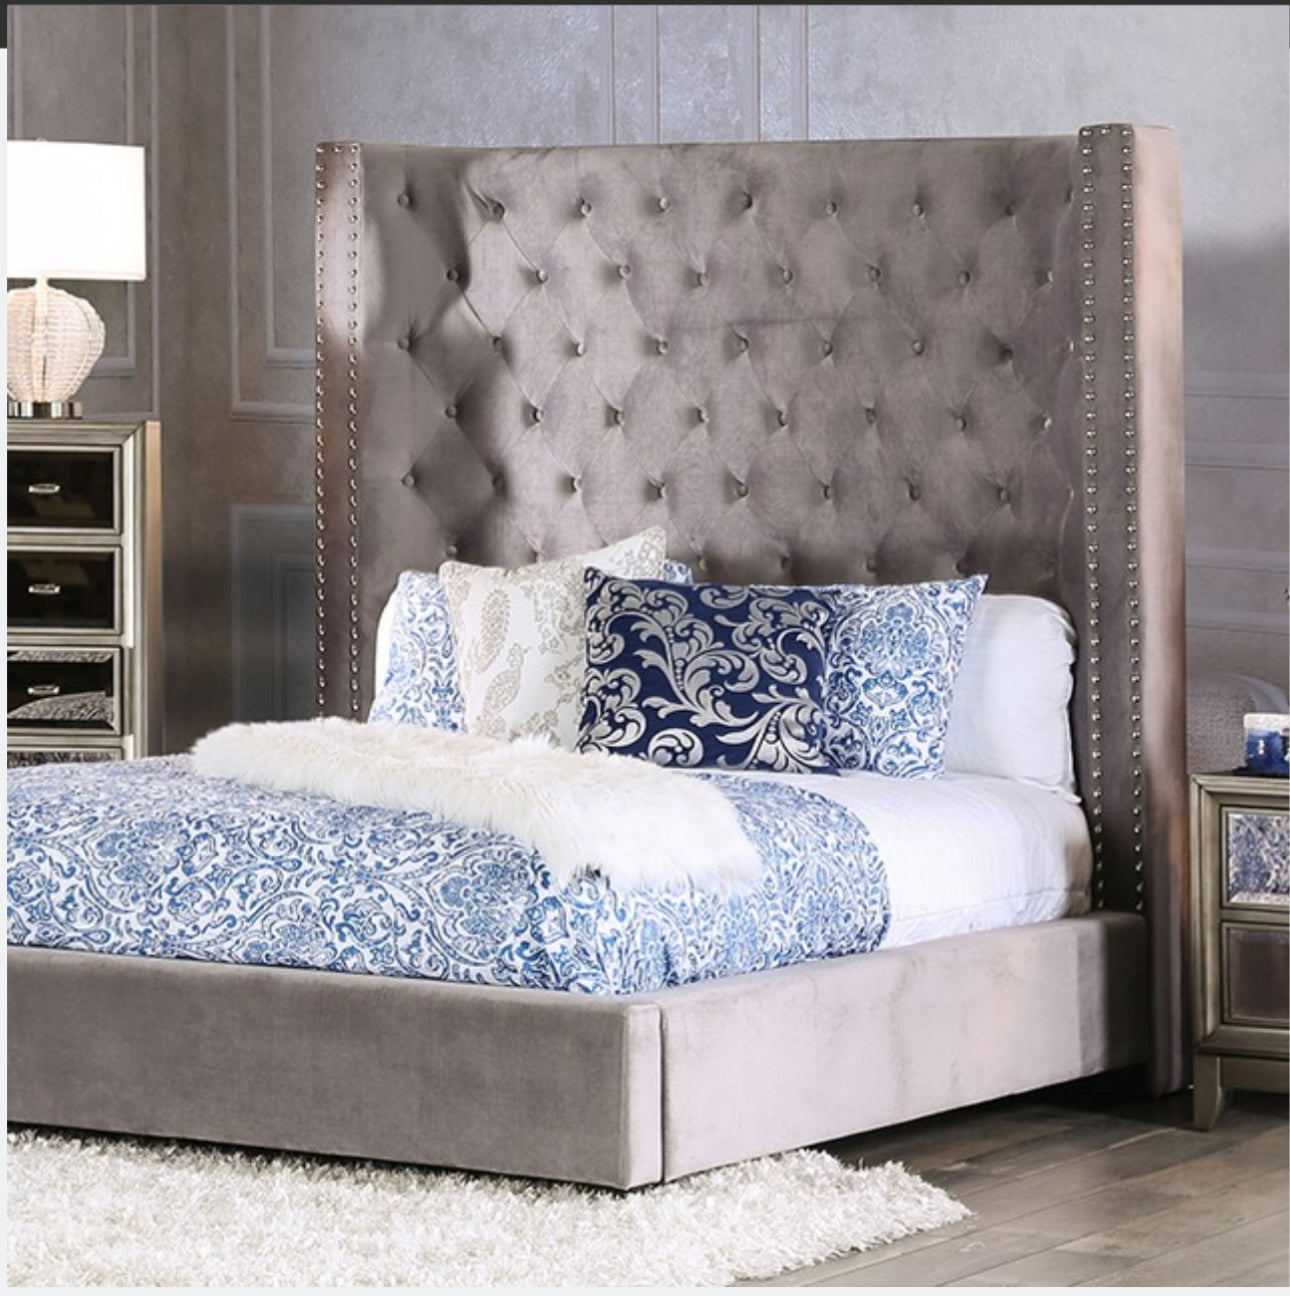 KING CAL KING OR QUEEN BED FRAME